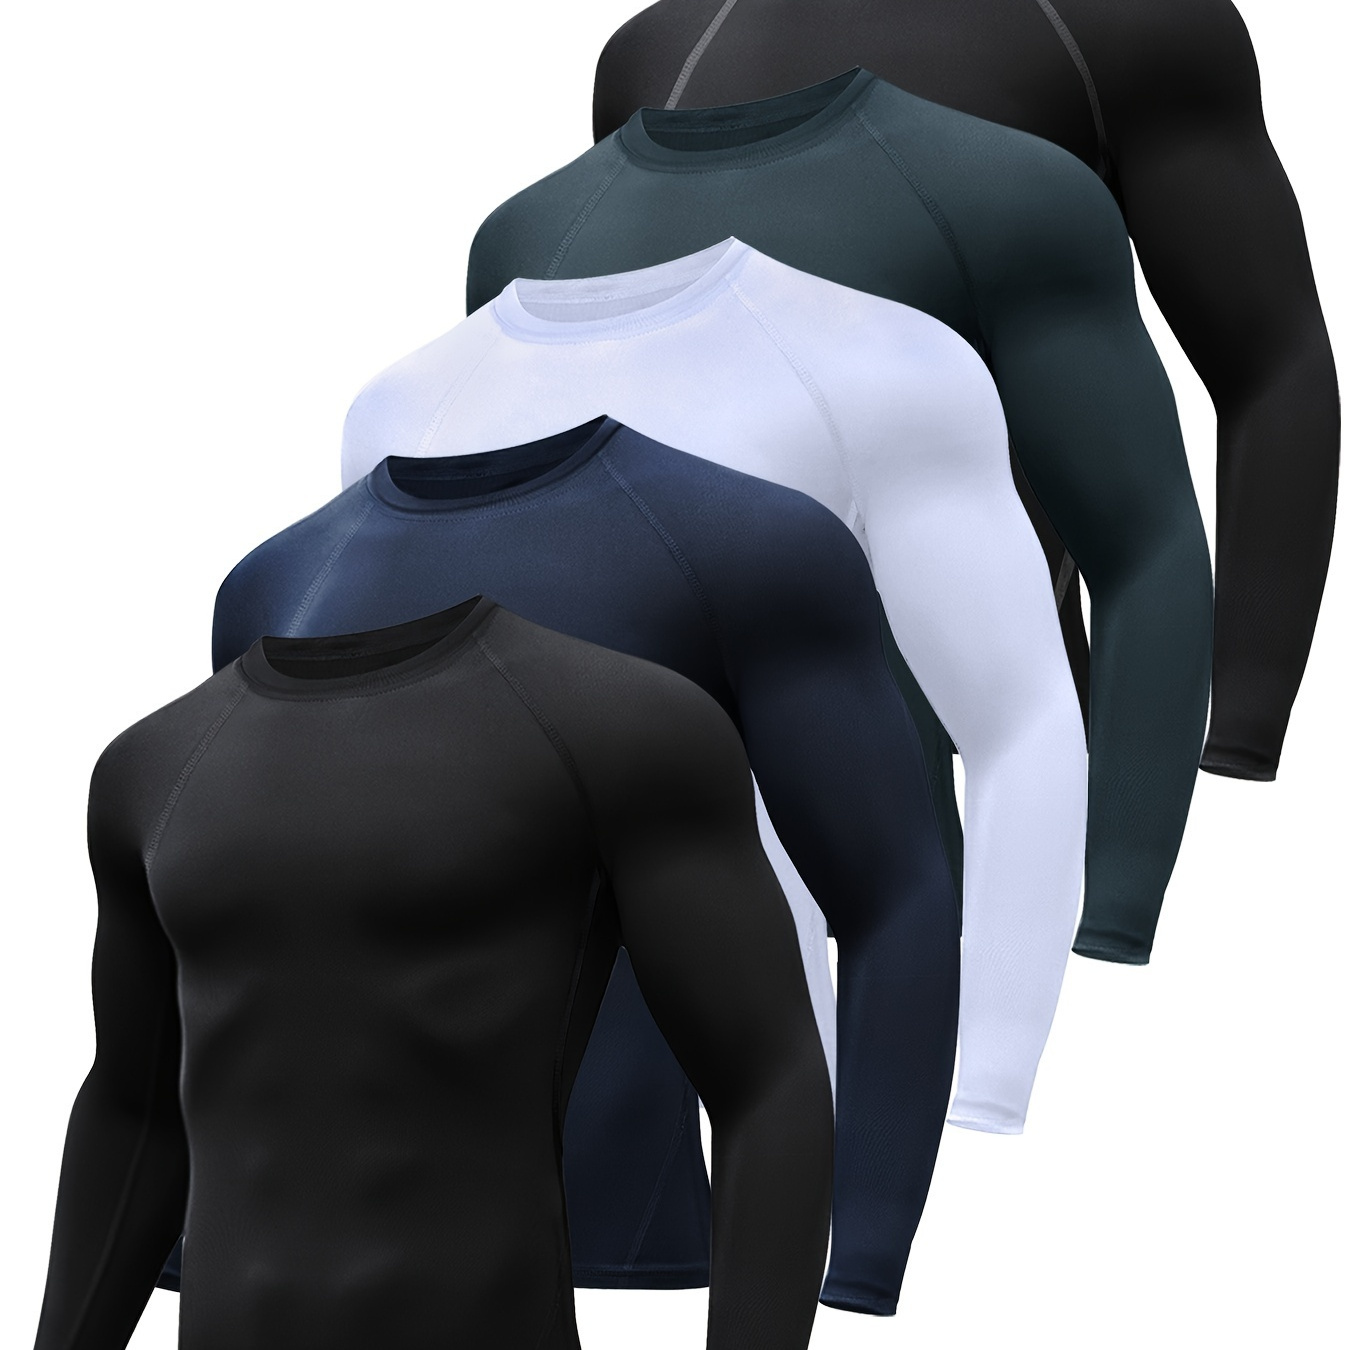 

5pcs/set Compression Shirts Men Long Sleeve Athletic Cold Weather Base-layer Undershirt Gear T-shirt For Sports Workout